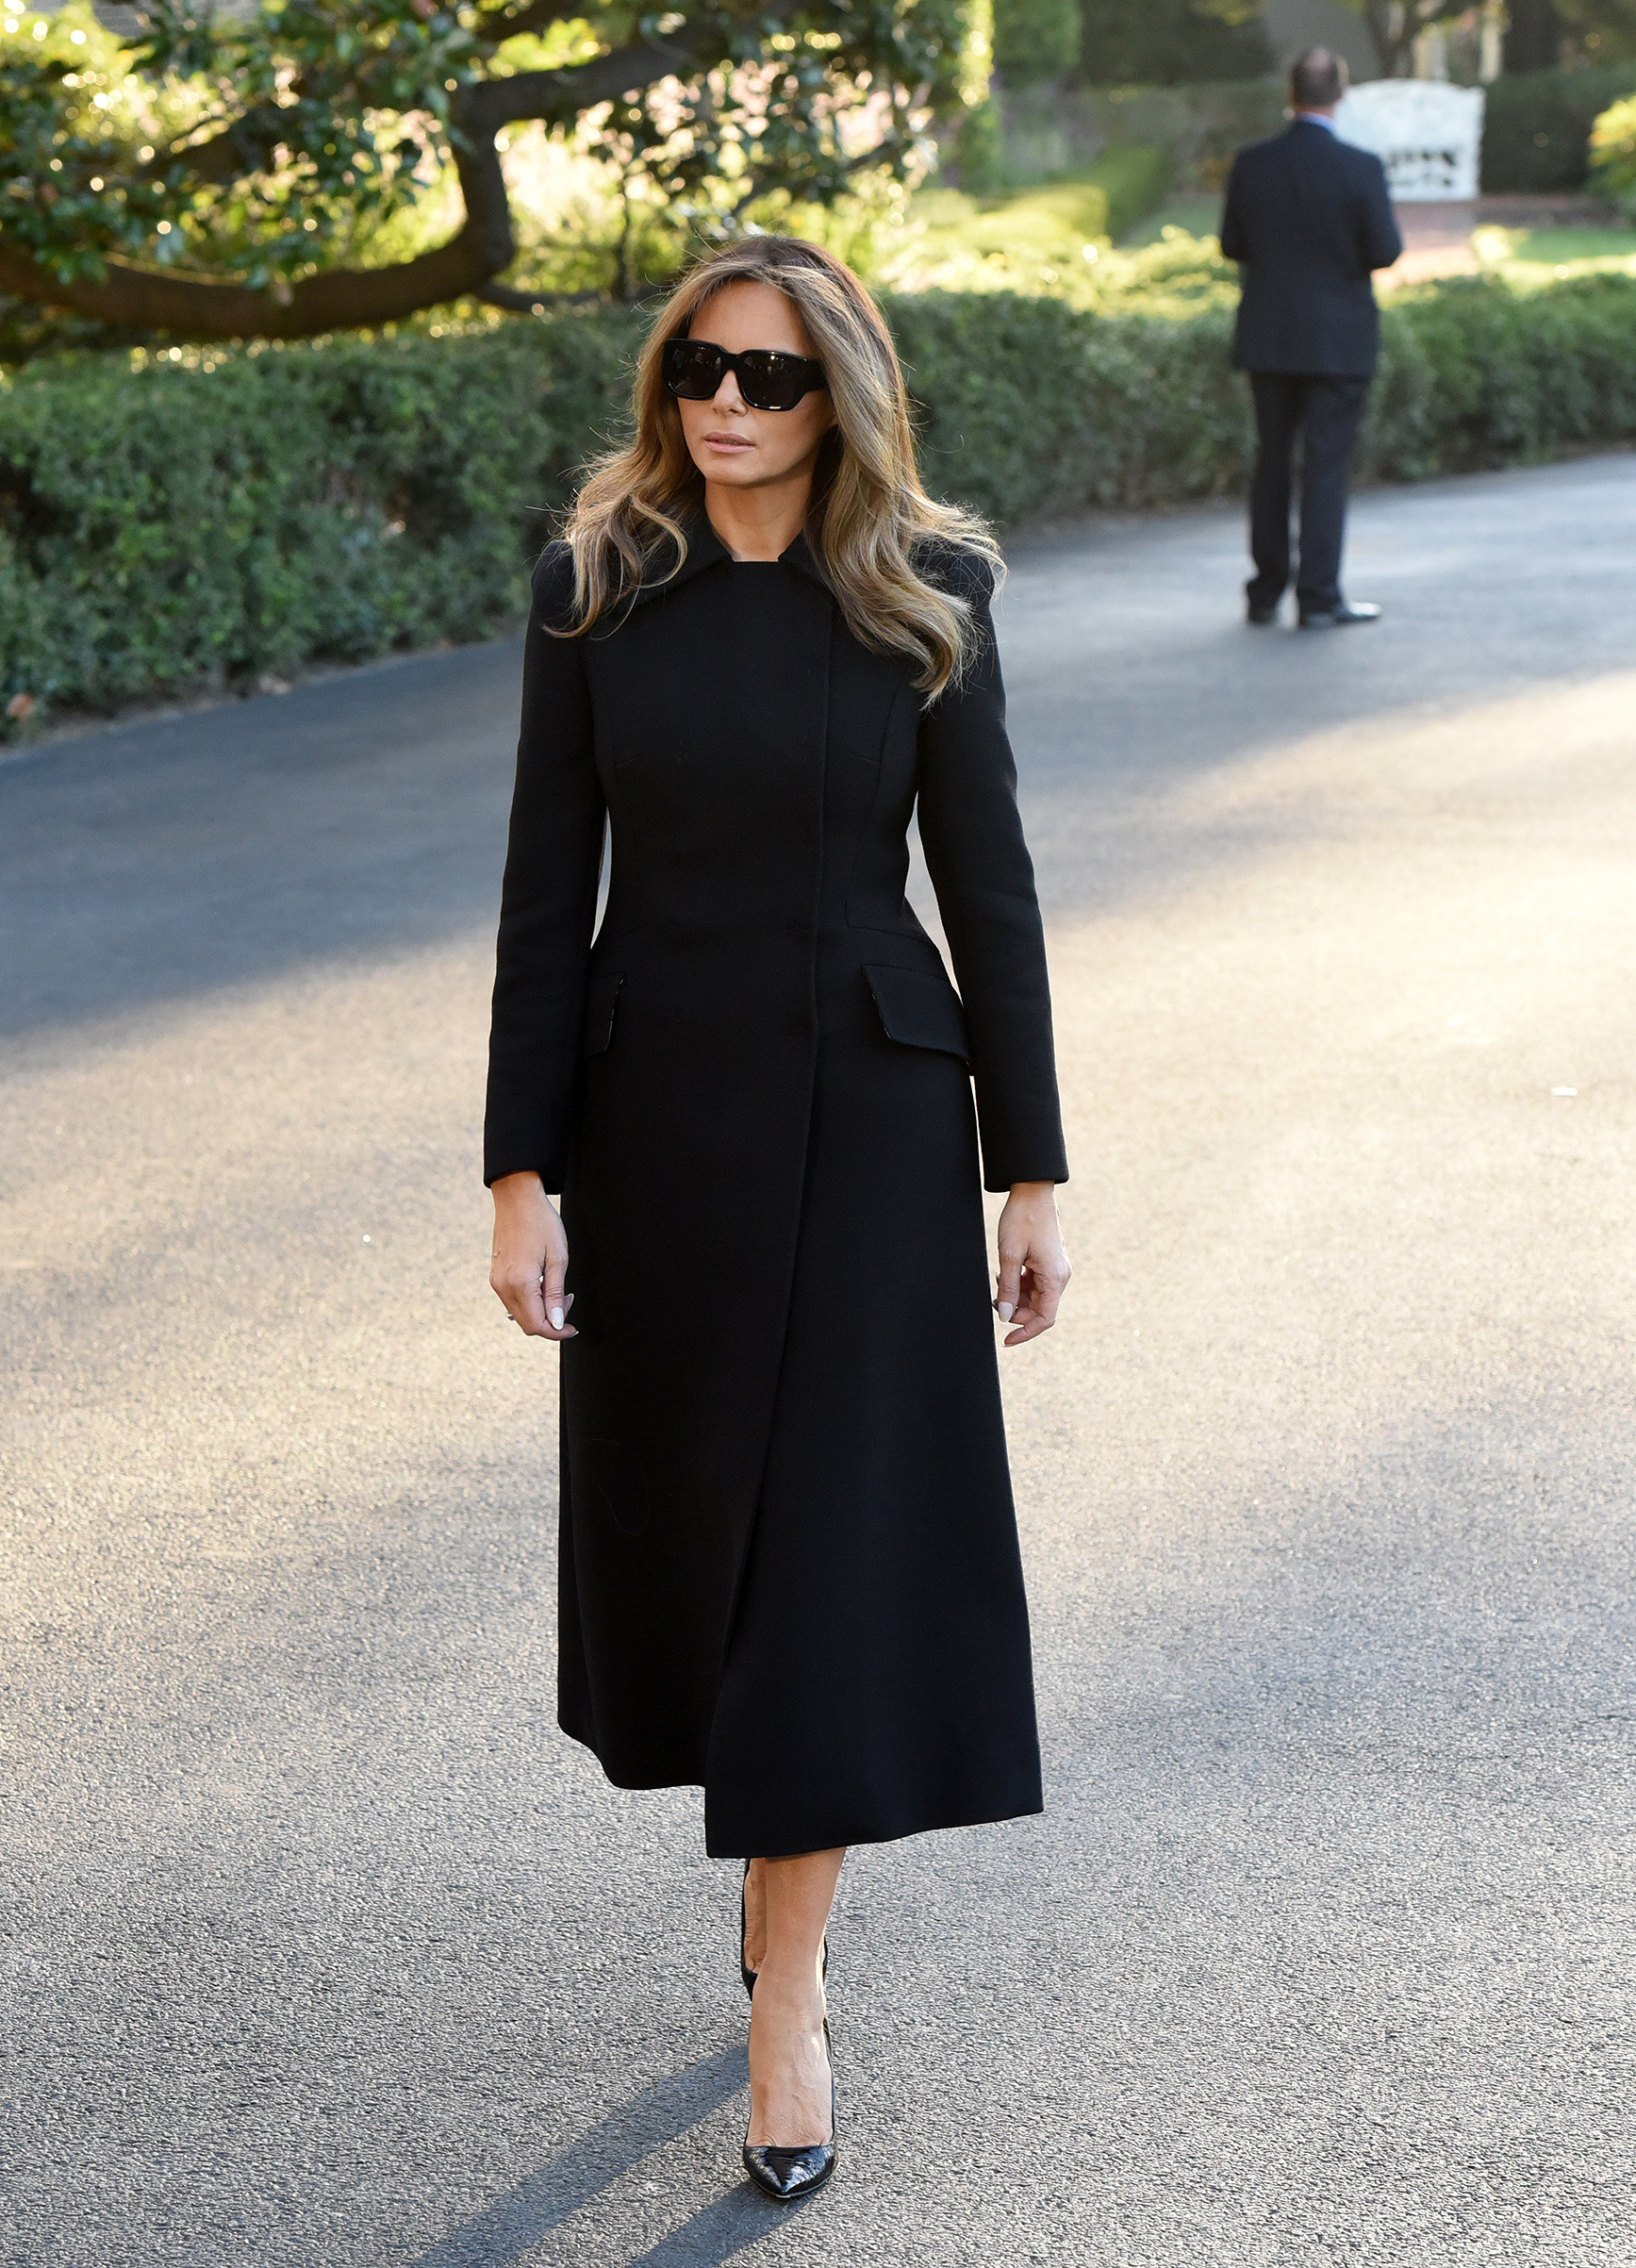 First Lady Melania Trump, departs the White House wearing a black full length coat, en route to Las Vegas, Nevada Oct. 4, 2017.